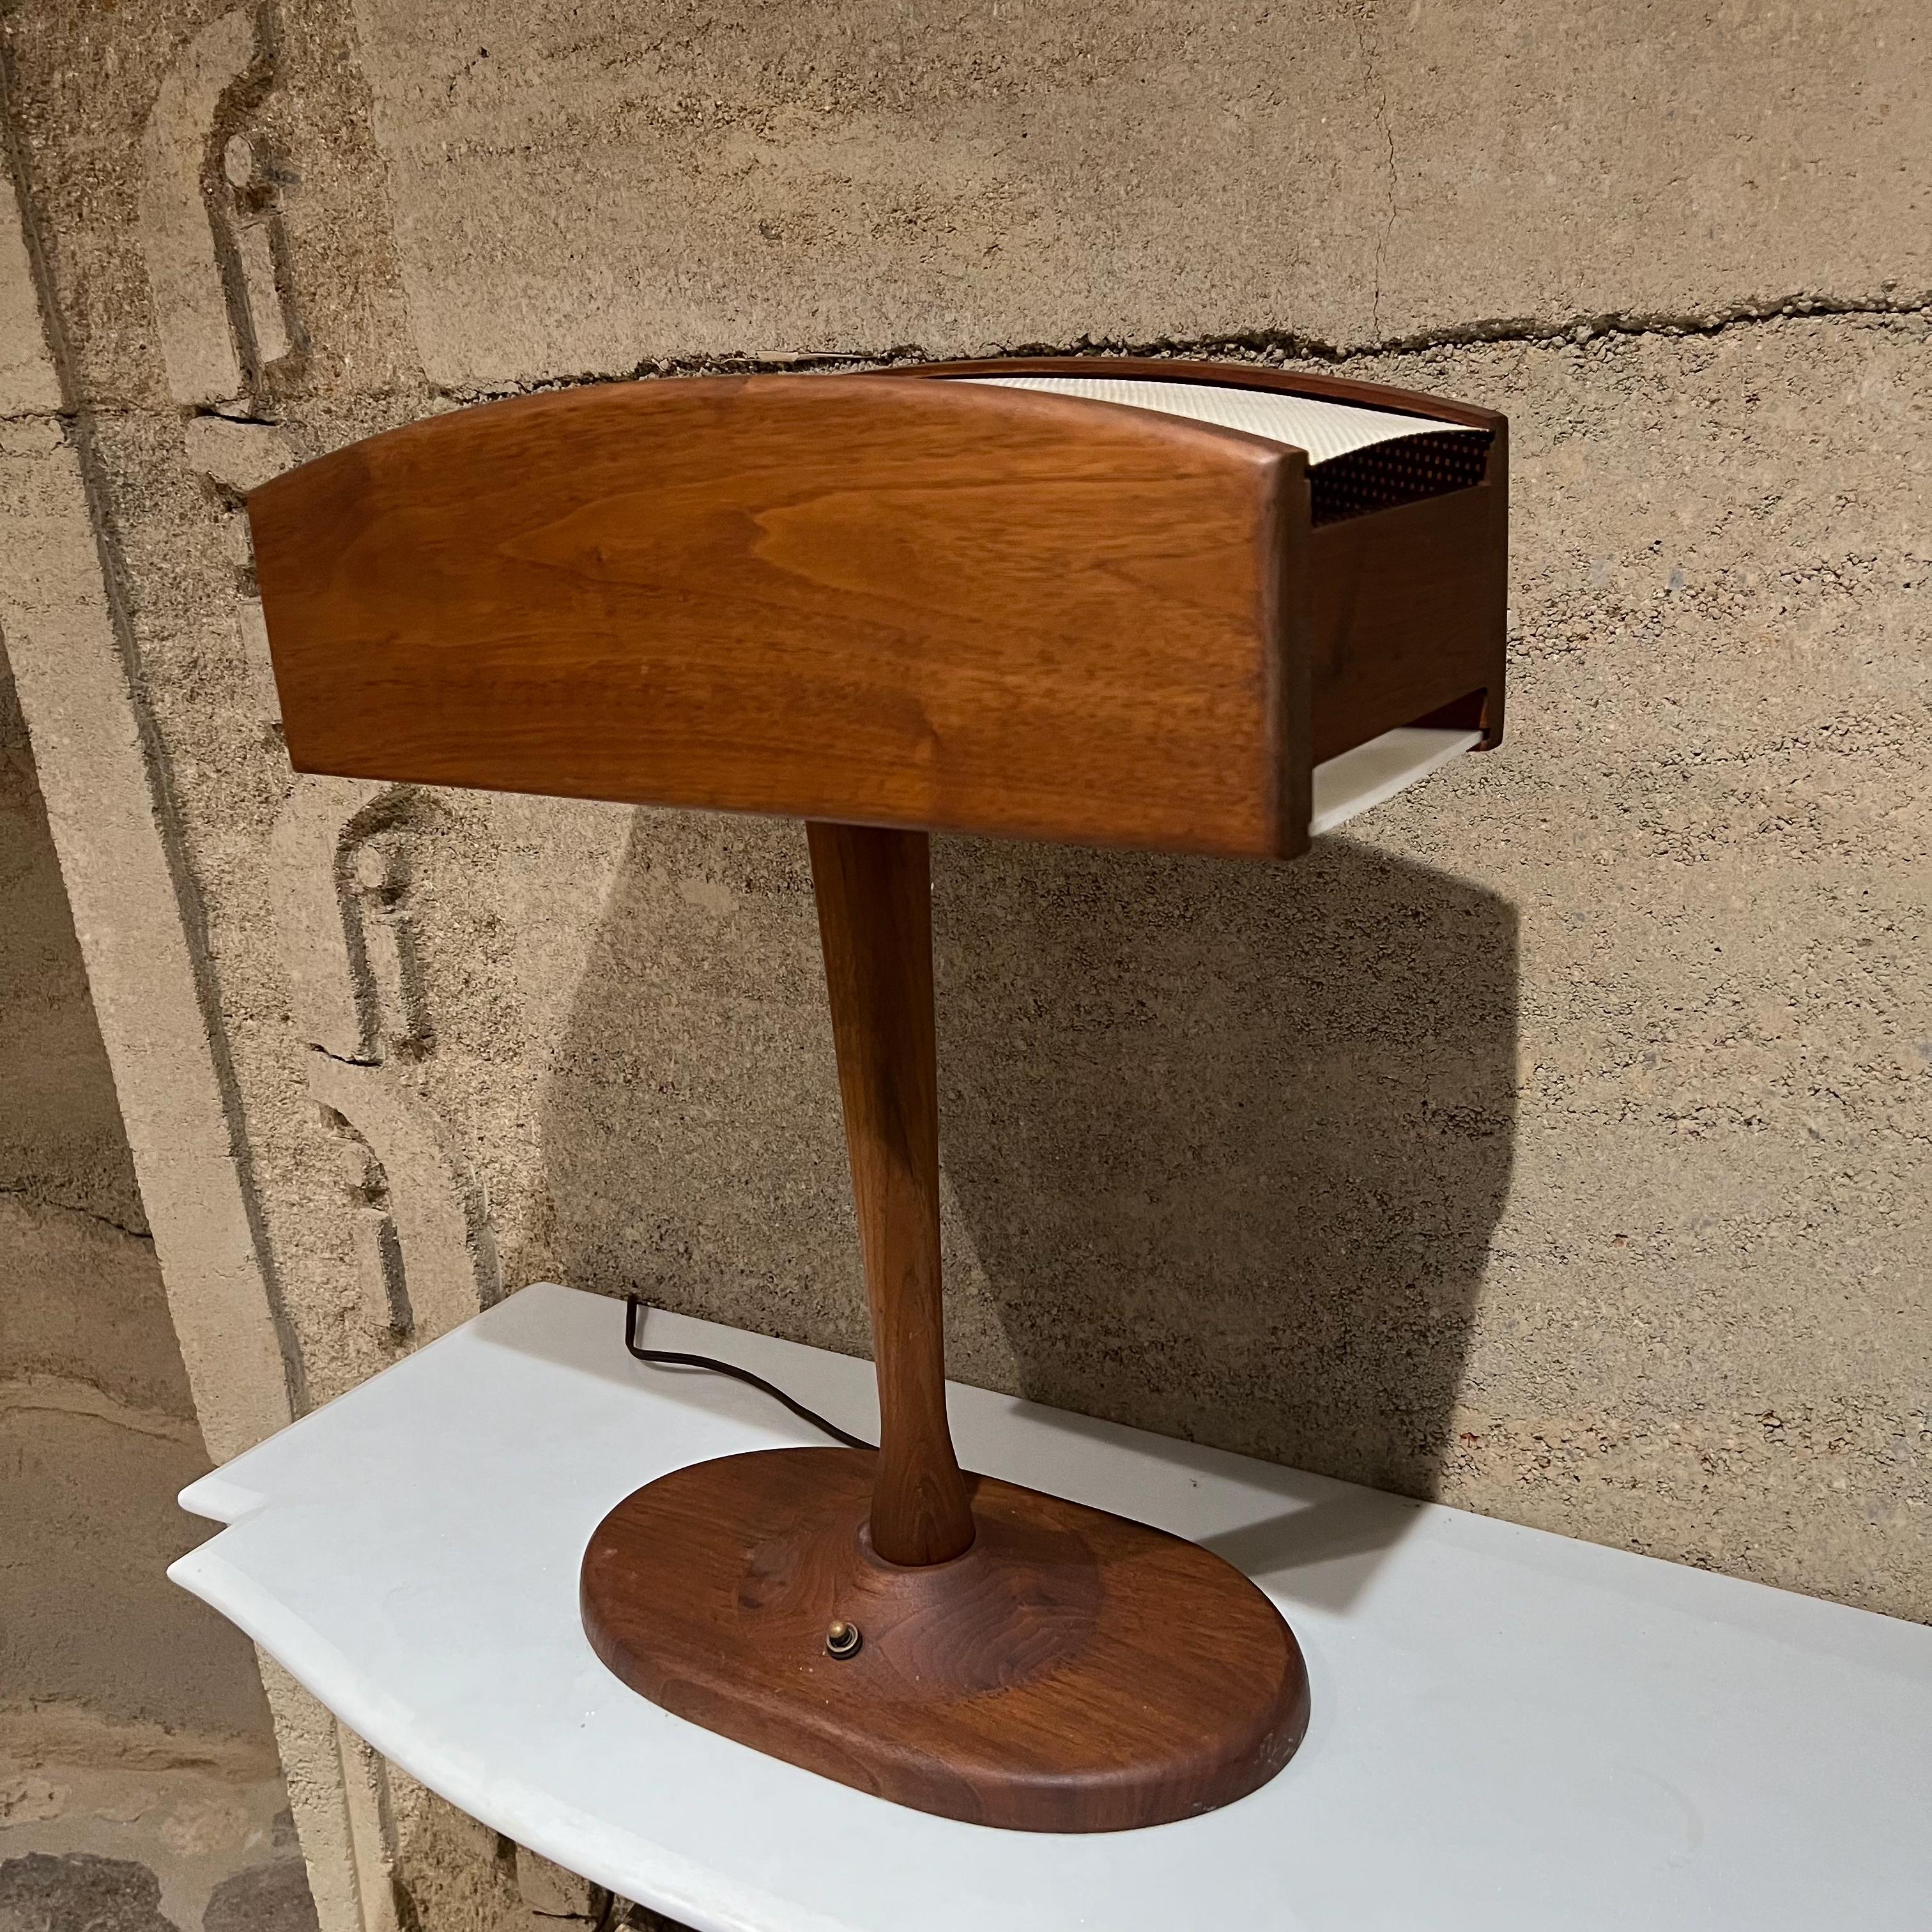 1960s Midcentury Modern Warm Walnut Wood Desk Lamp Organic Beauty In Good Condition For Sale In Chula Vista, CA